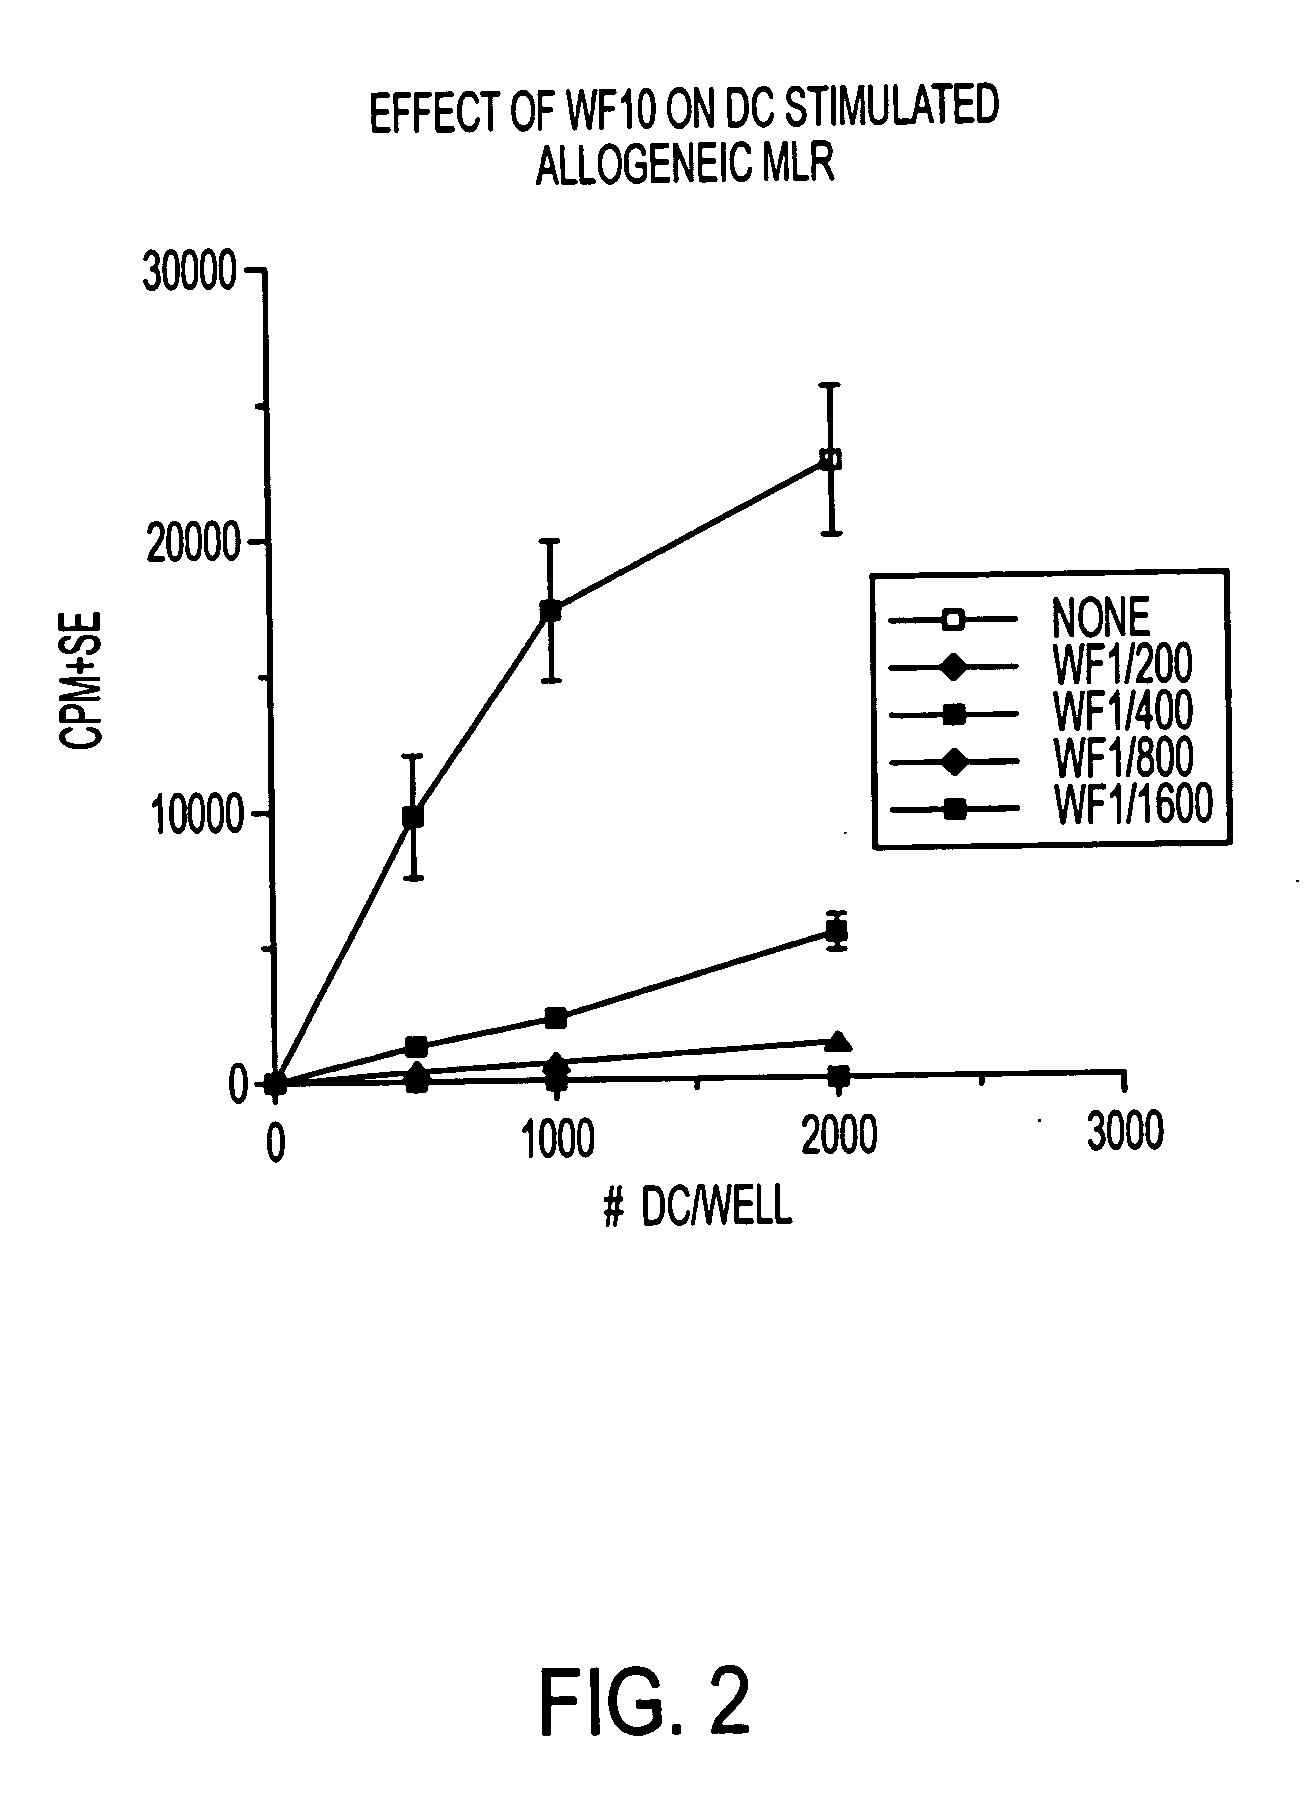 Use of a chemically stabilized chlorite solution for inhibiting an antigen-specific immune response